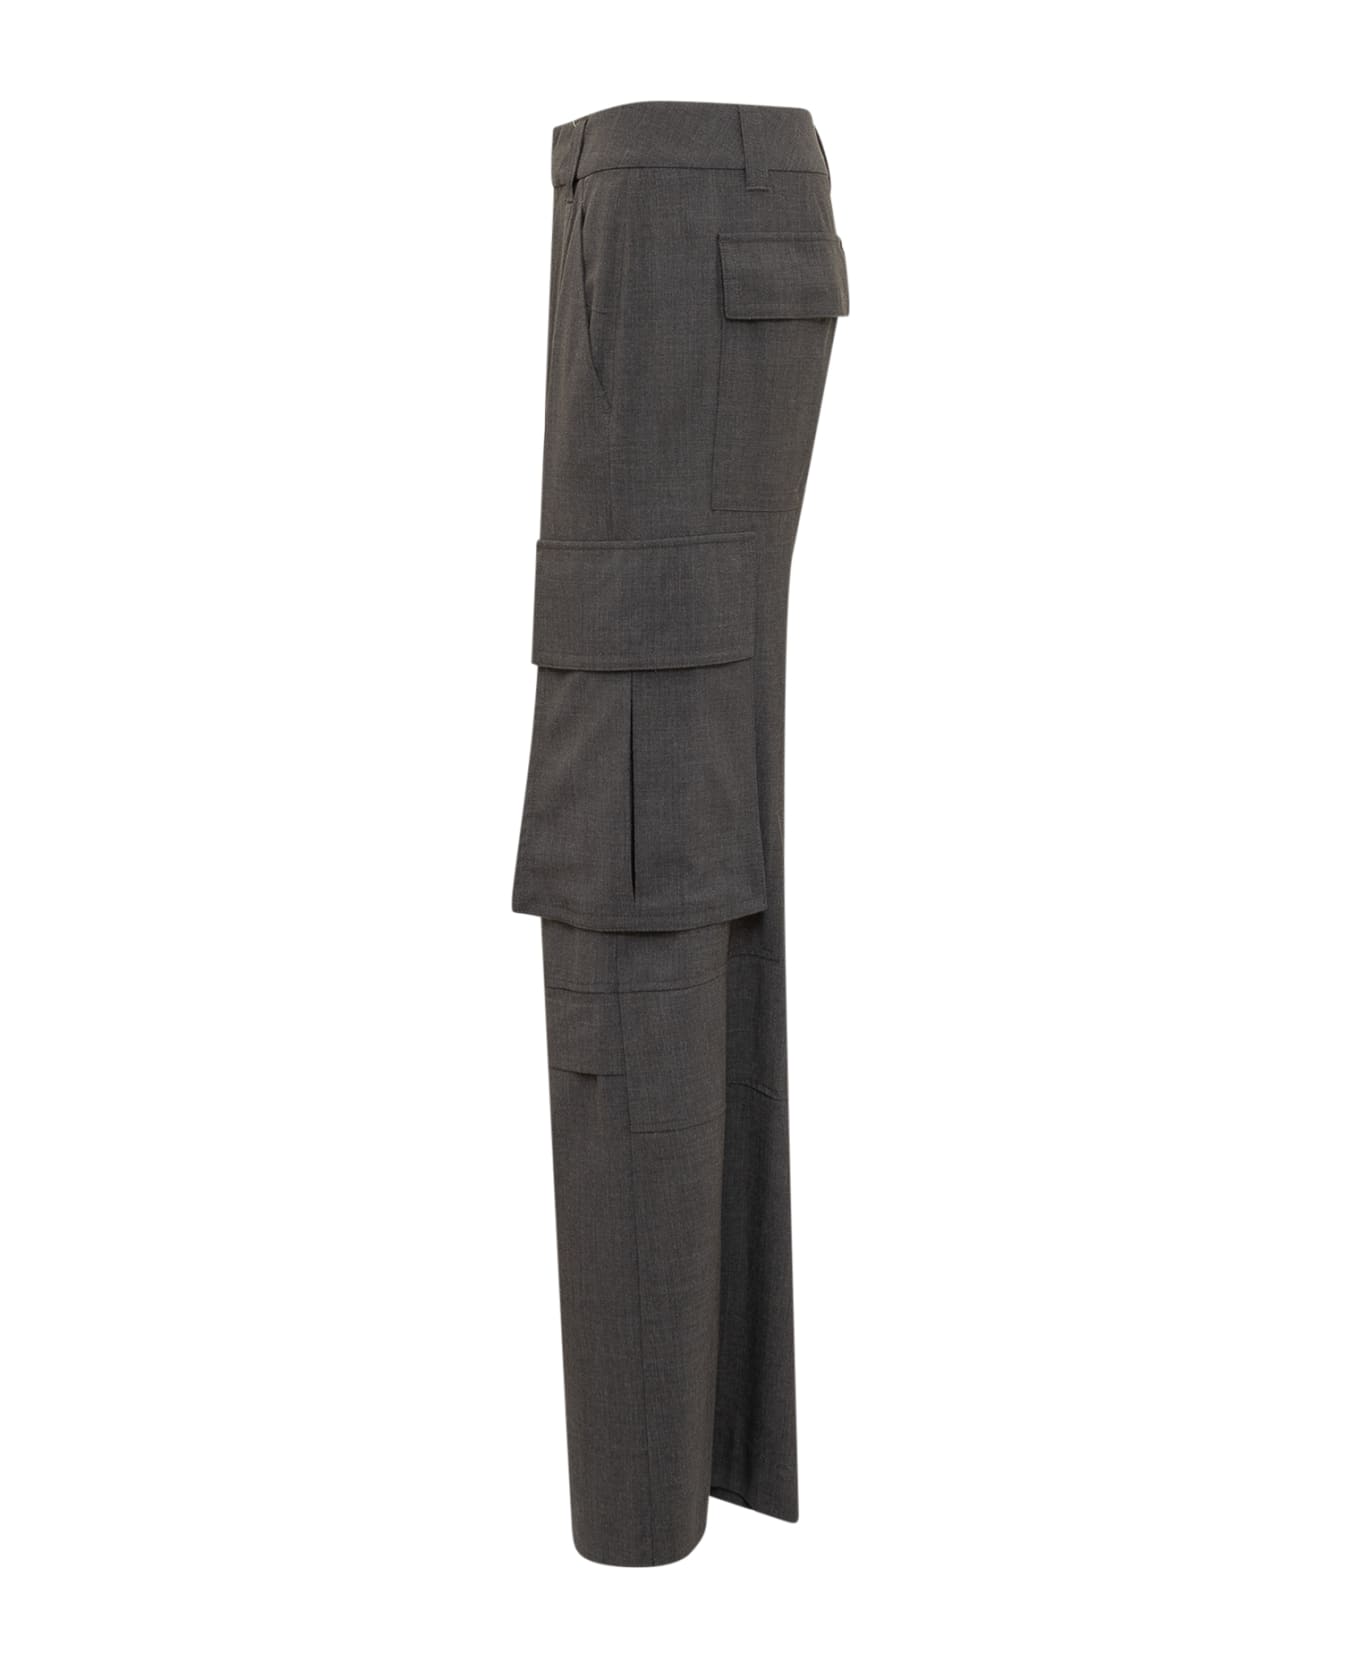 The Seafarer Police Trousers - 7091 ボトムス